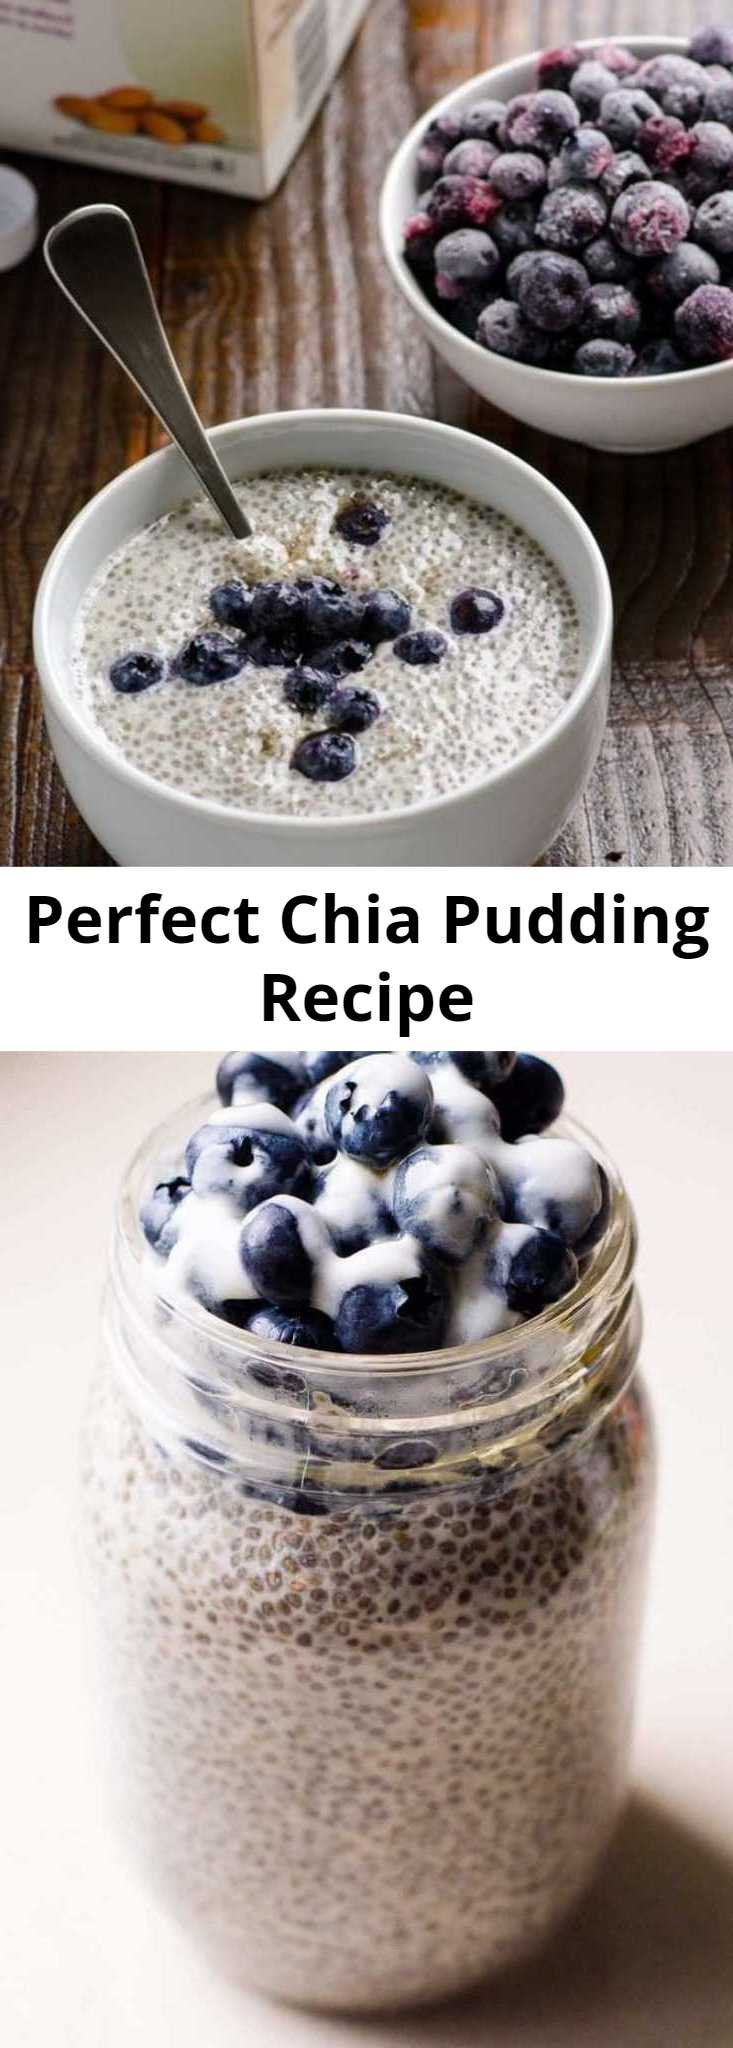 Perfect Chia Pudding Recipe - Chia Pudding perfect consistency every time with one pro tip. Only 4 ingredients and you have easy healthy breakfast or snack for a week.